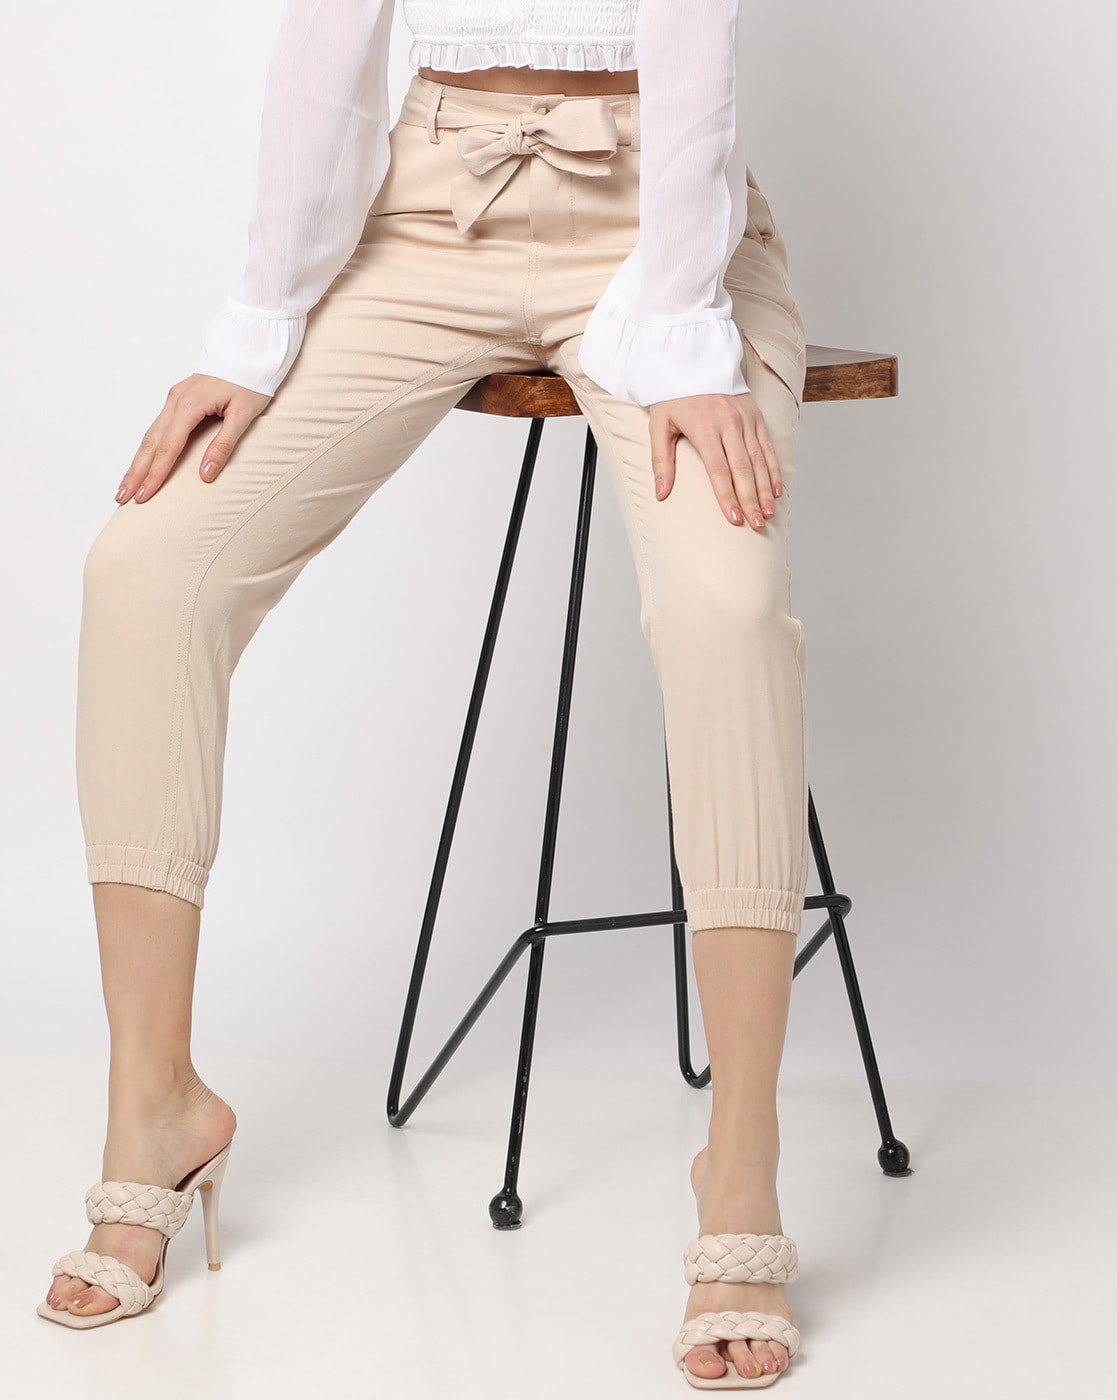 Buy Pink Trousers & Pants for Women by Styli Online | Ajio.com